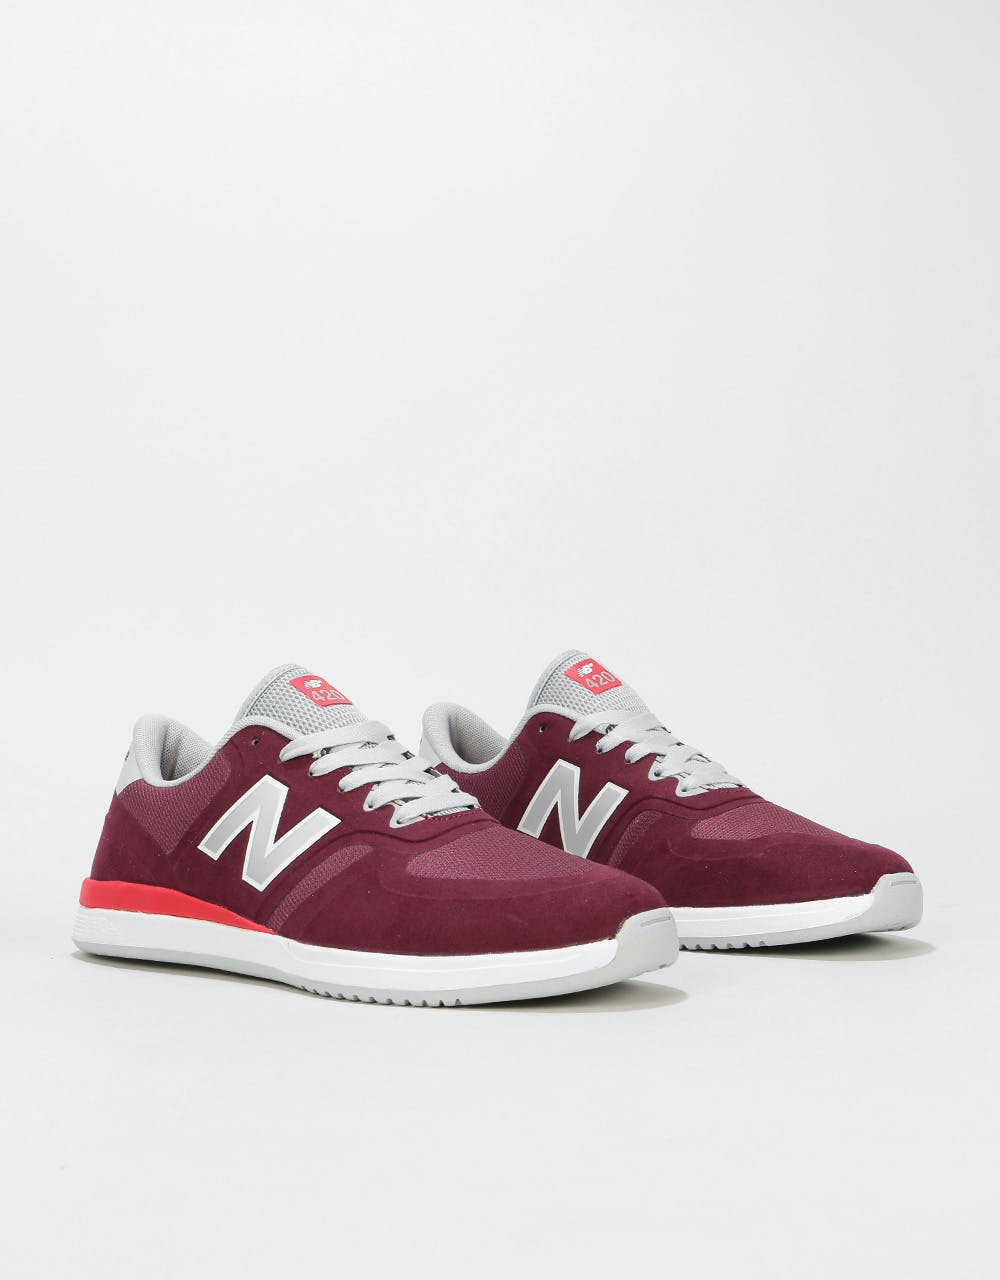 New Balance Numeric Henry 420 Skate Shoes - Burgundy/Red